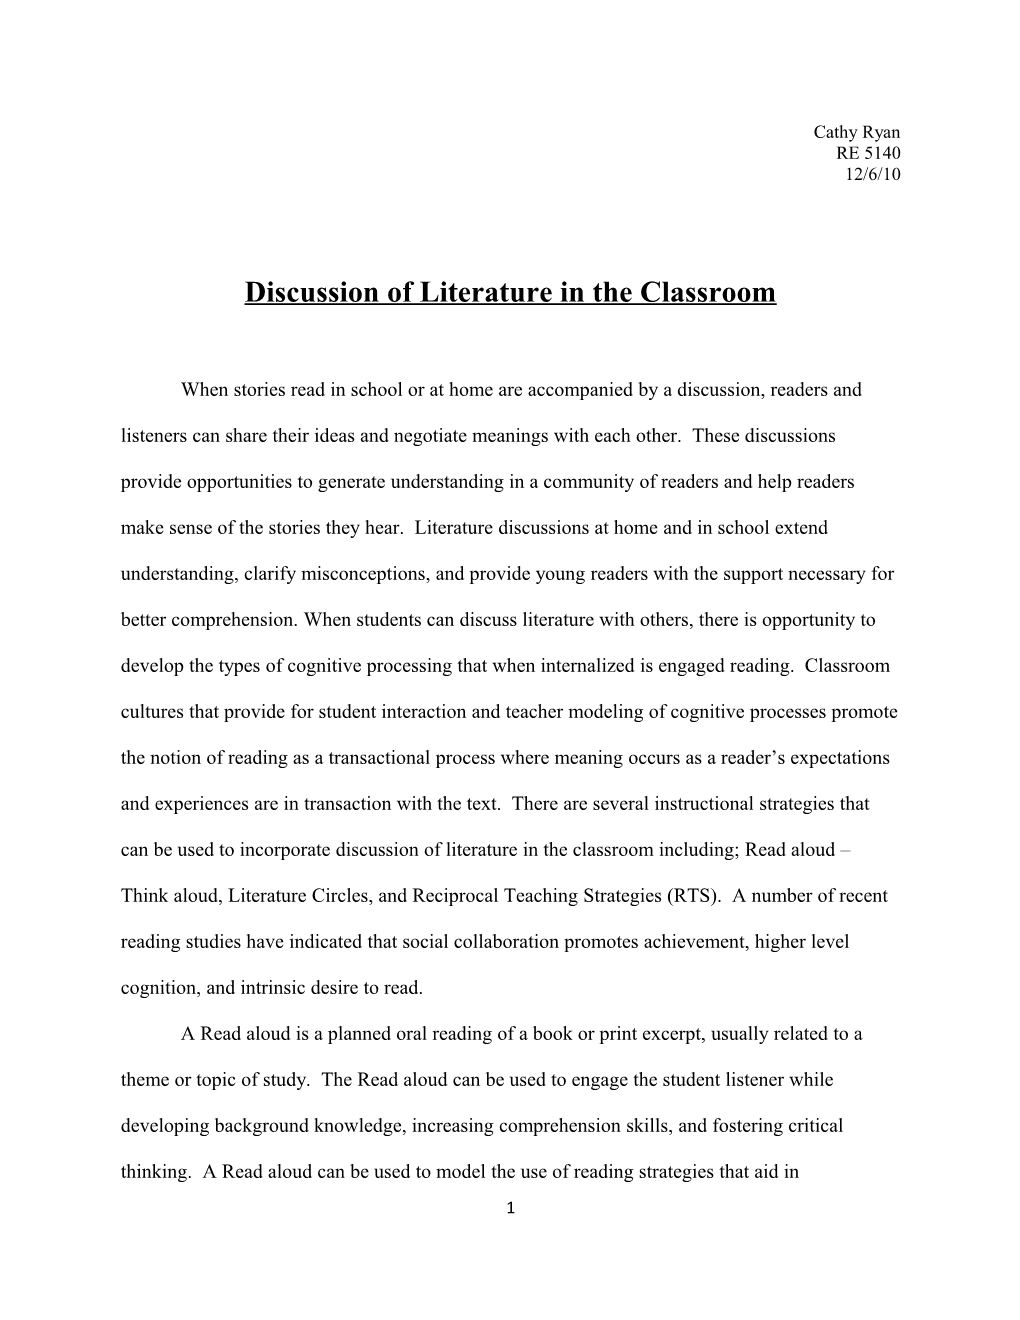 Discussion of Literature in the Classroom